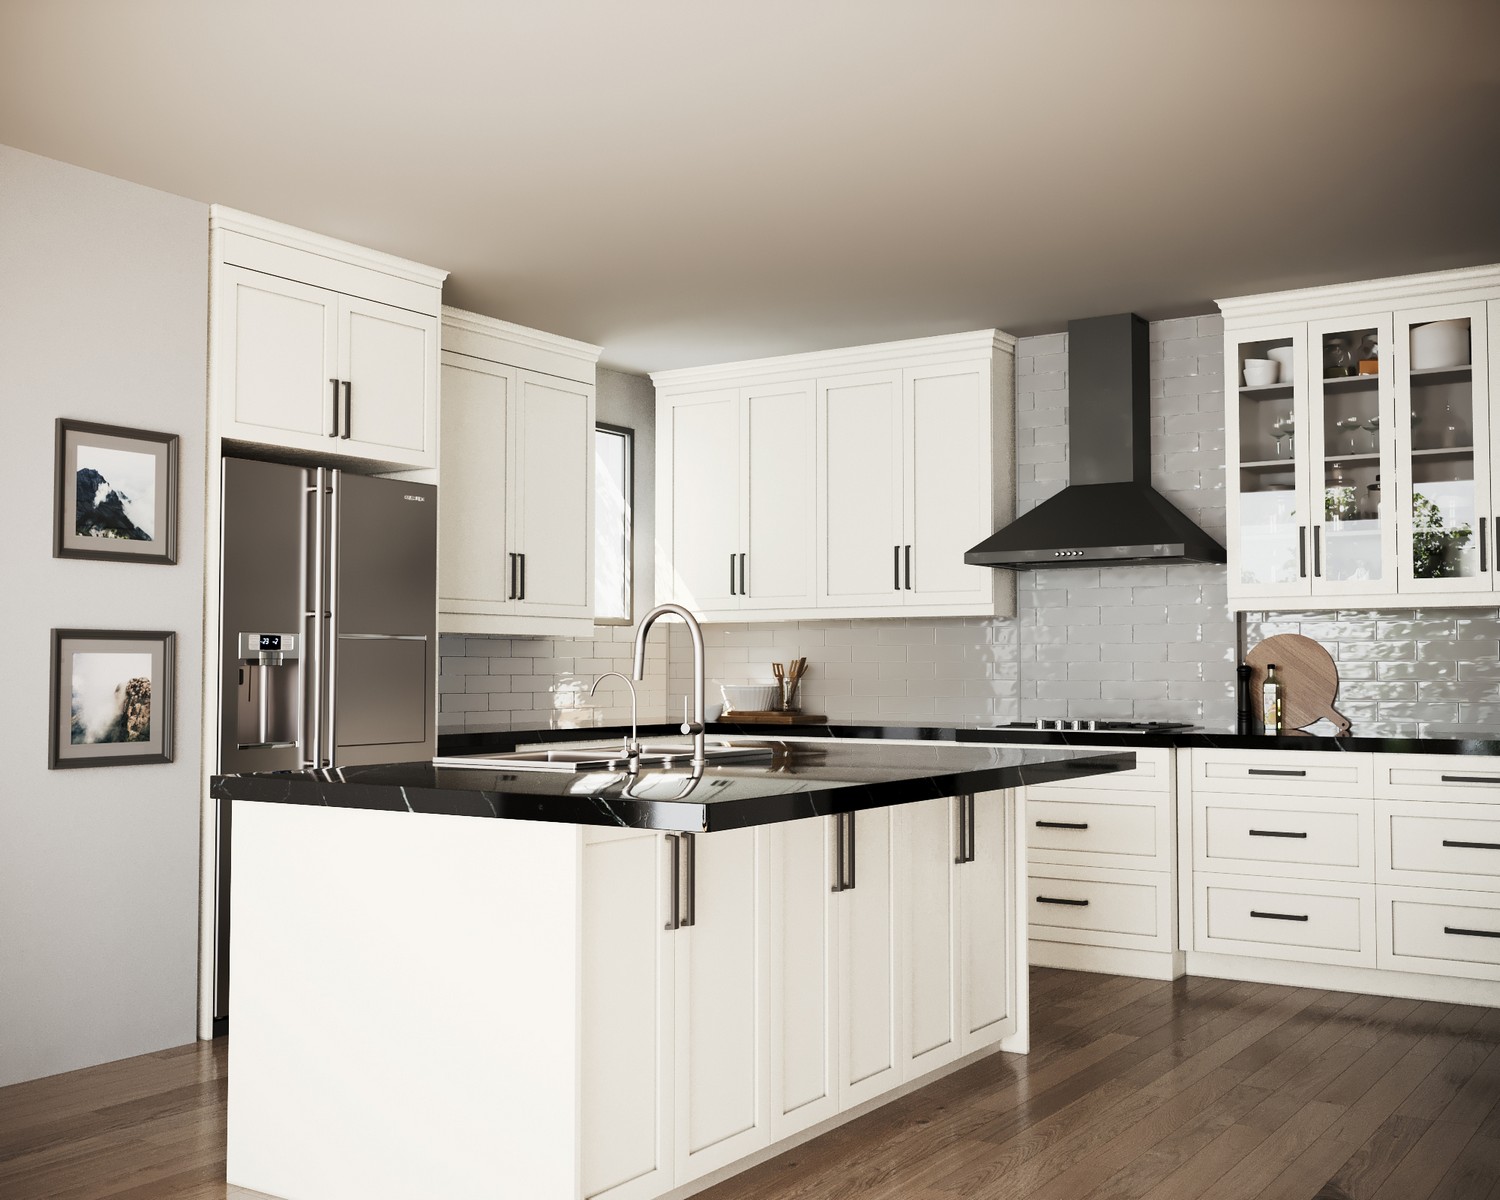 Kitchen Beauty Shots Showcasing The Cabinetry Style - , 2